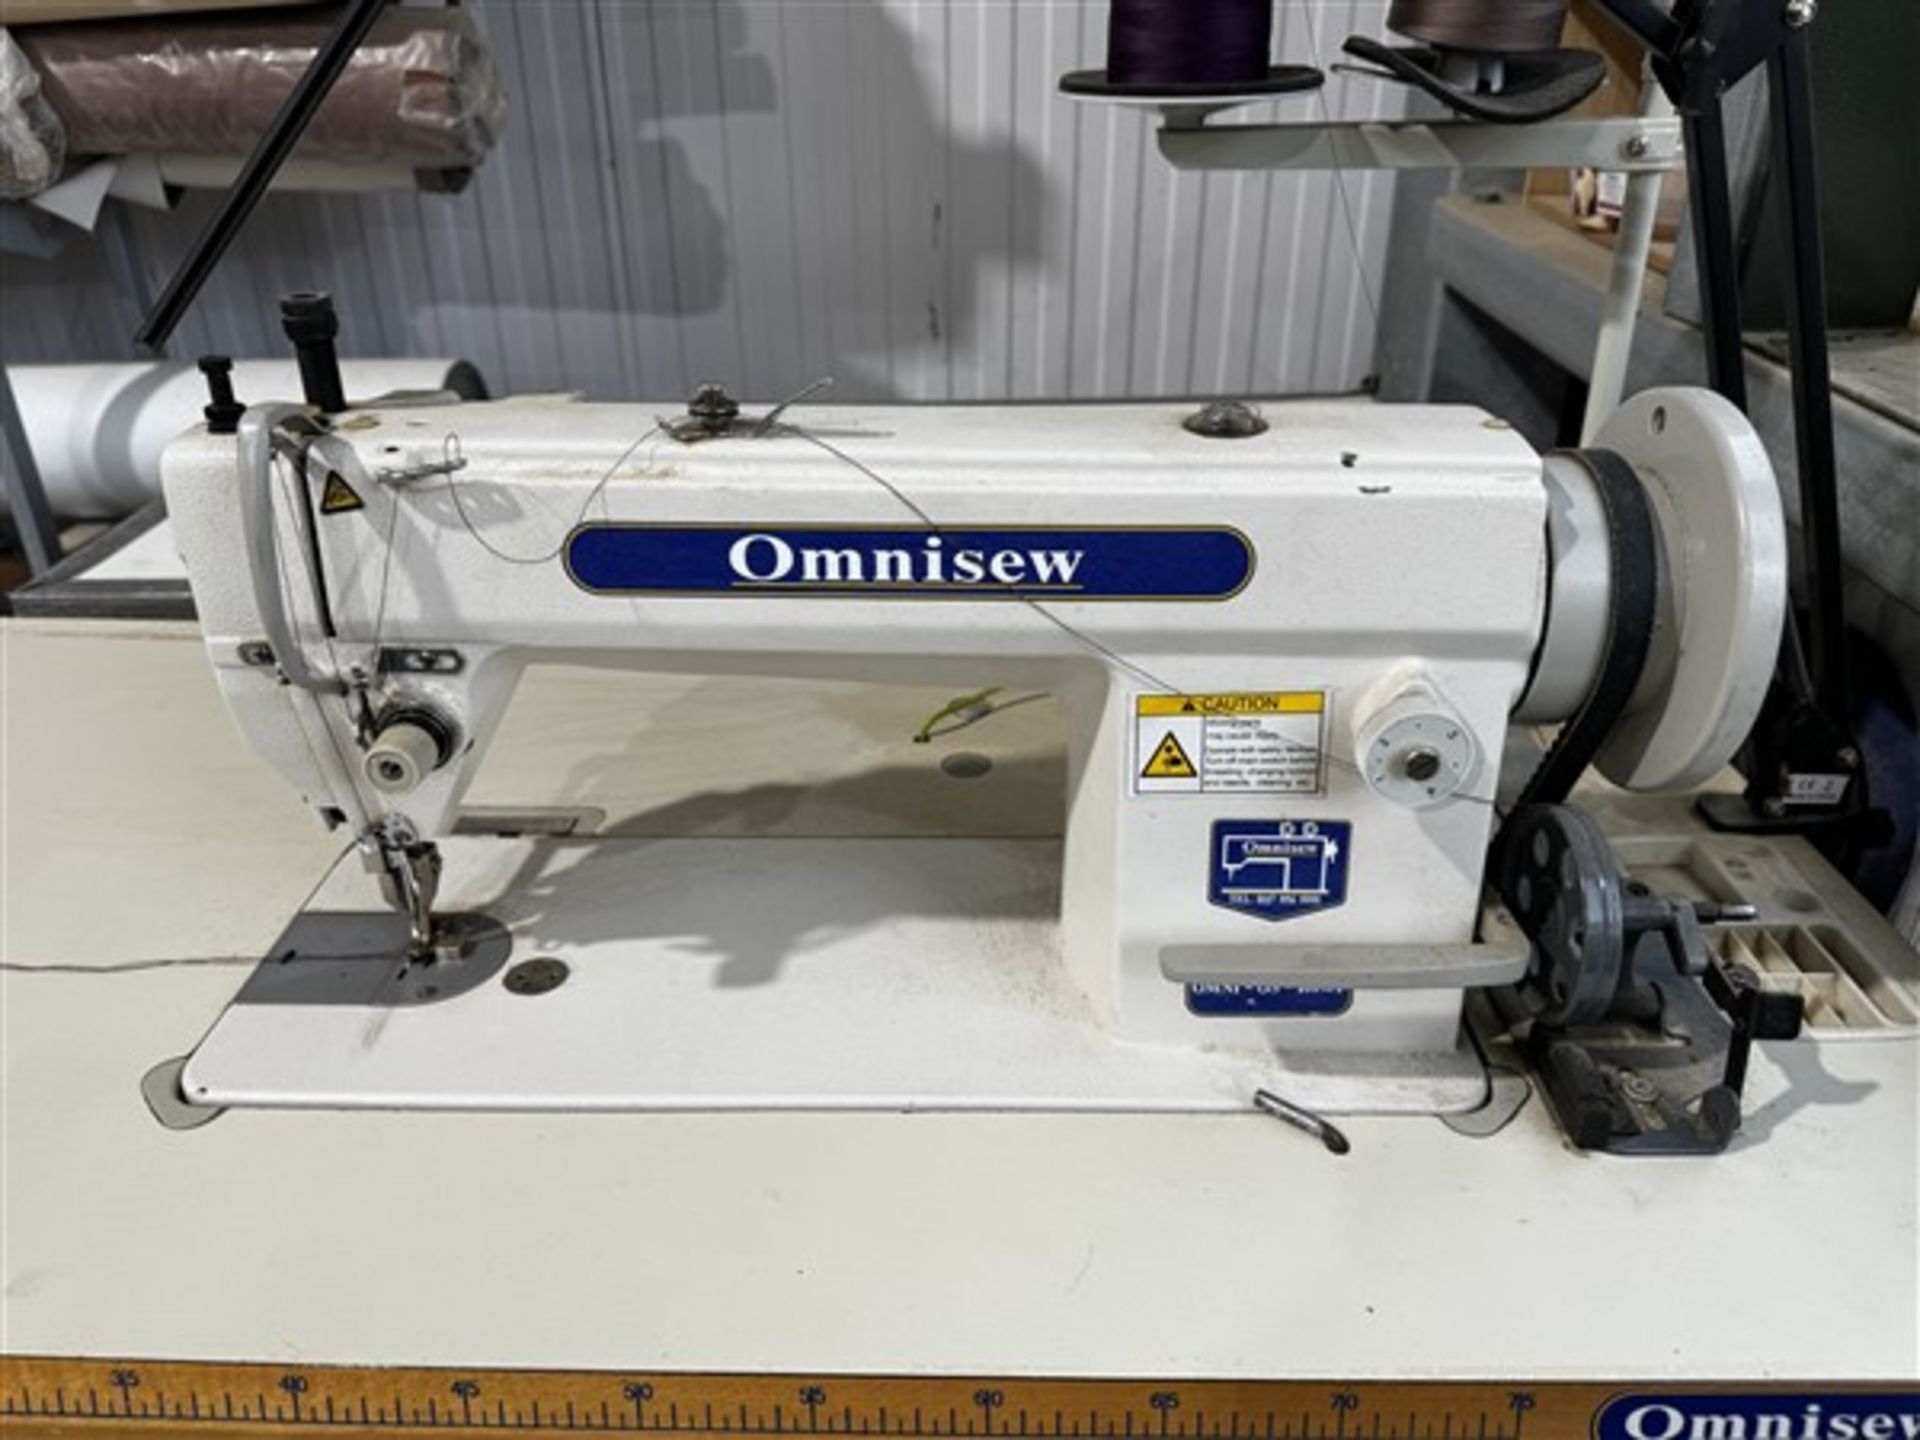 Omnisew flat bed sewing machine - Image 2 of 4